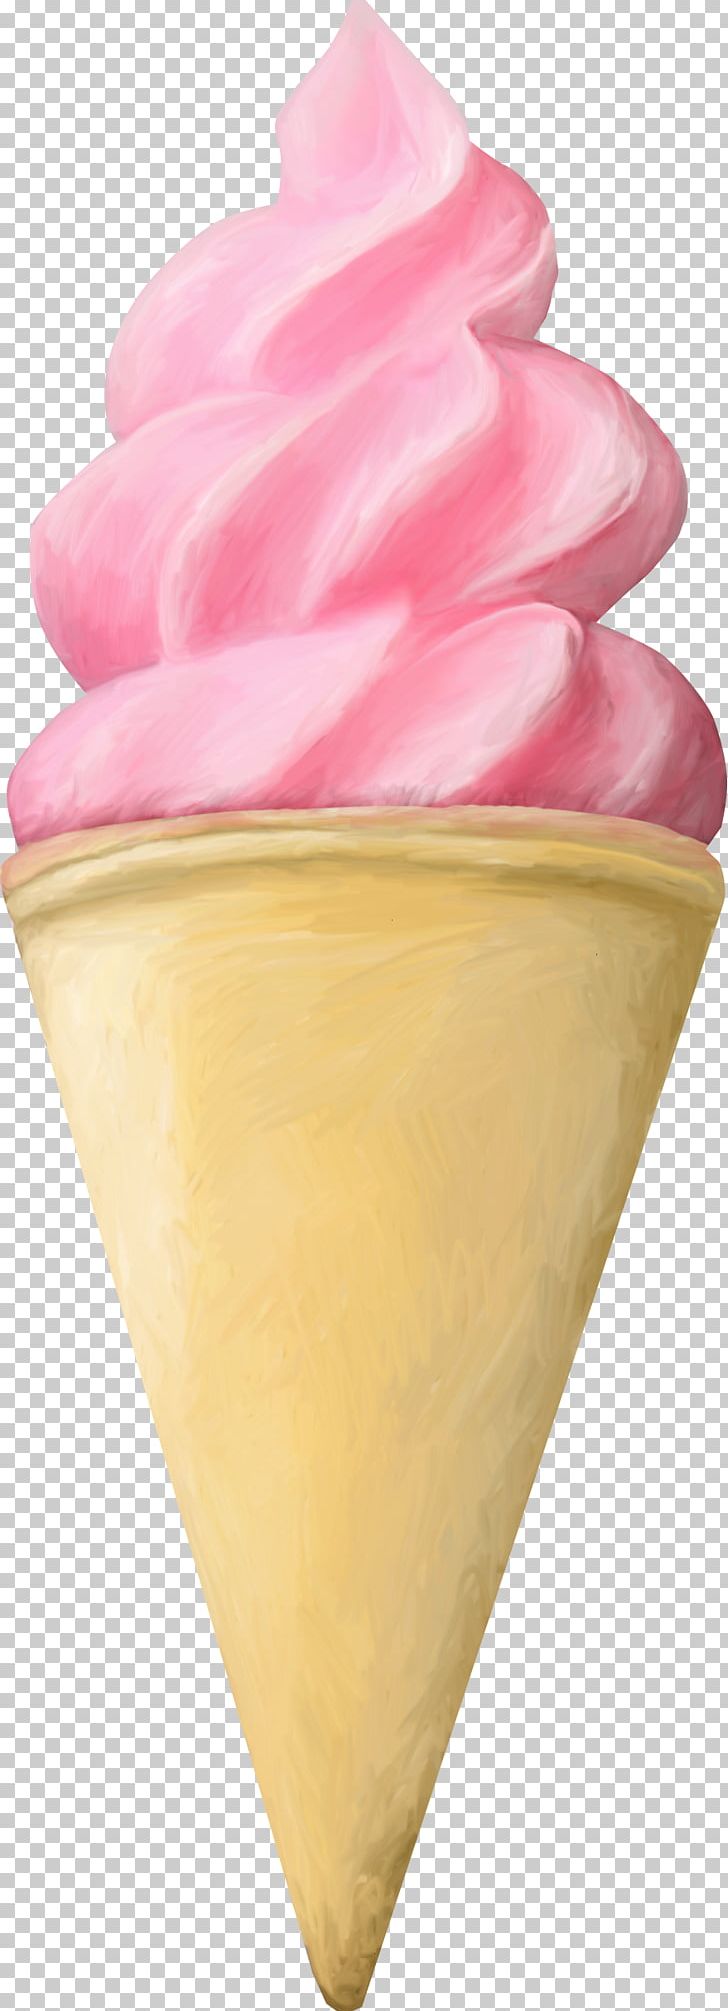 Ice Cream Cone Gelato Sundae Italian Ice PNG, Clipart, Cone, Cone Ice Cream, Cones Icecream Gelato, Cream, Dairy Product Free PNG Download